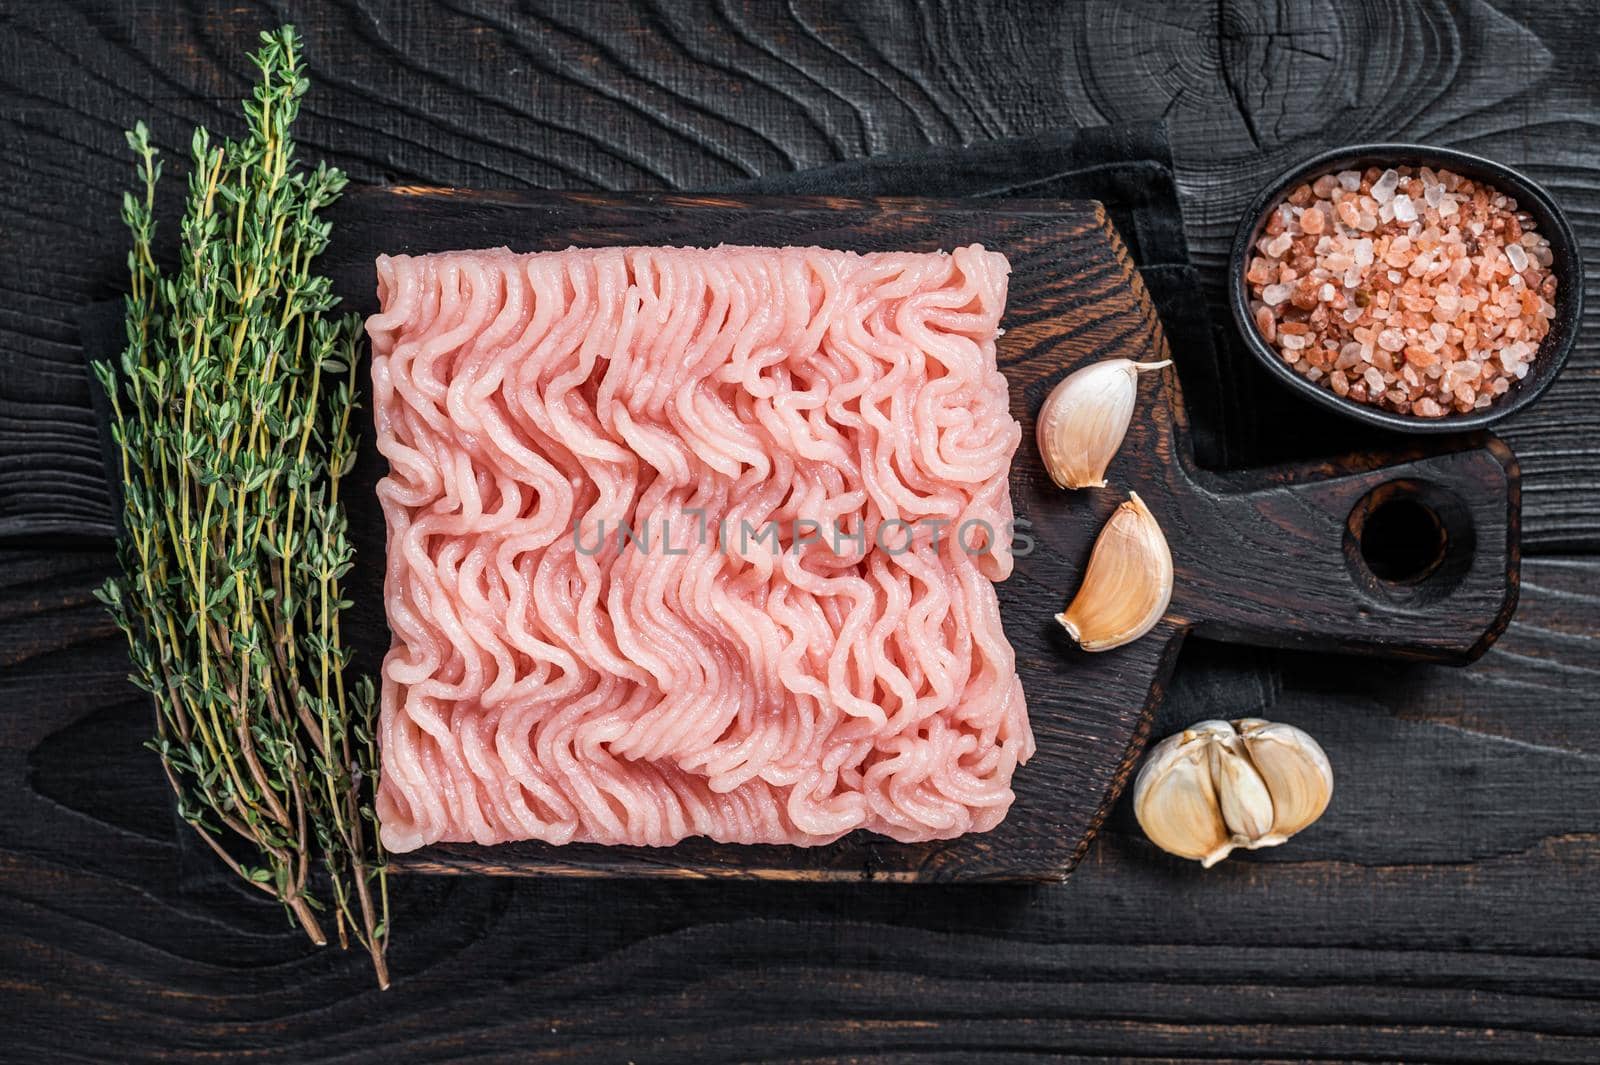 Fresh Raw mince or ground chicken meat on wooden chopping board with thyme. Black wooden background. Top view by Composter